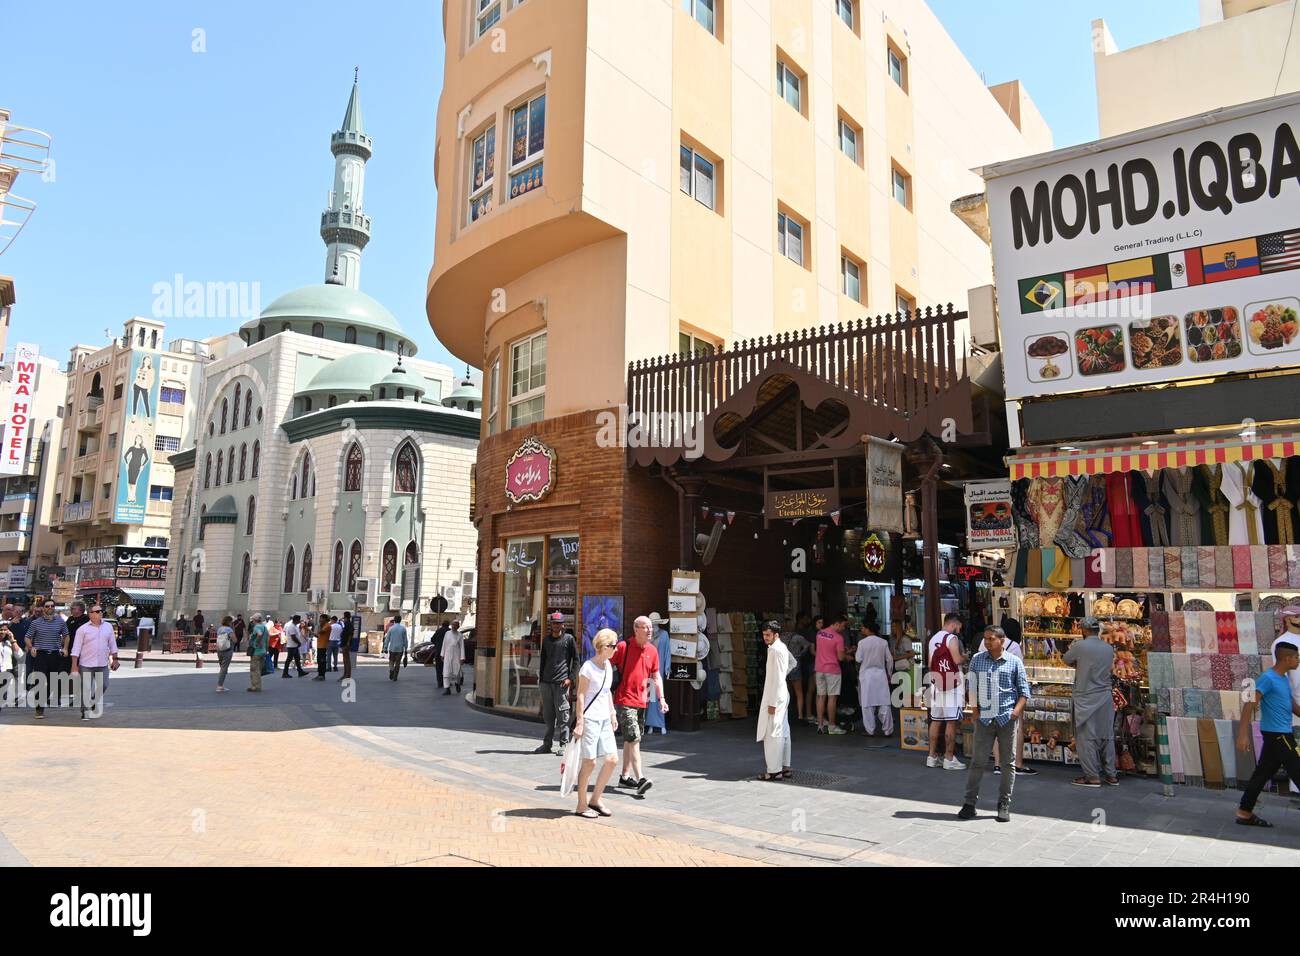 The entrance of the utensil souq in Deira, one of the oldest and most established areas of Dubai, United Arab Emirates Stock Photo